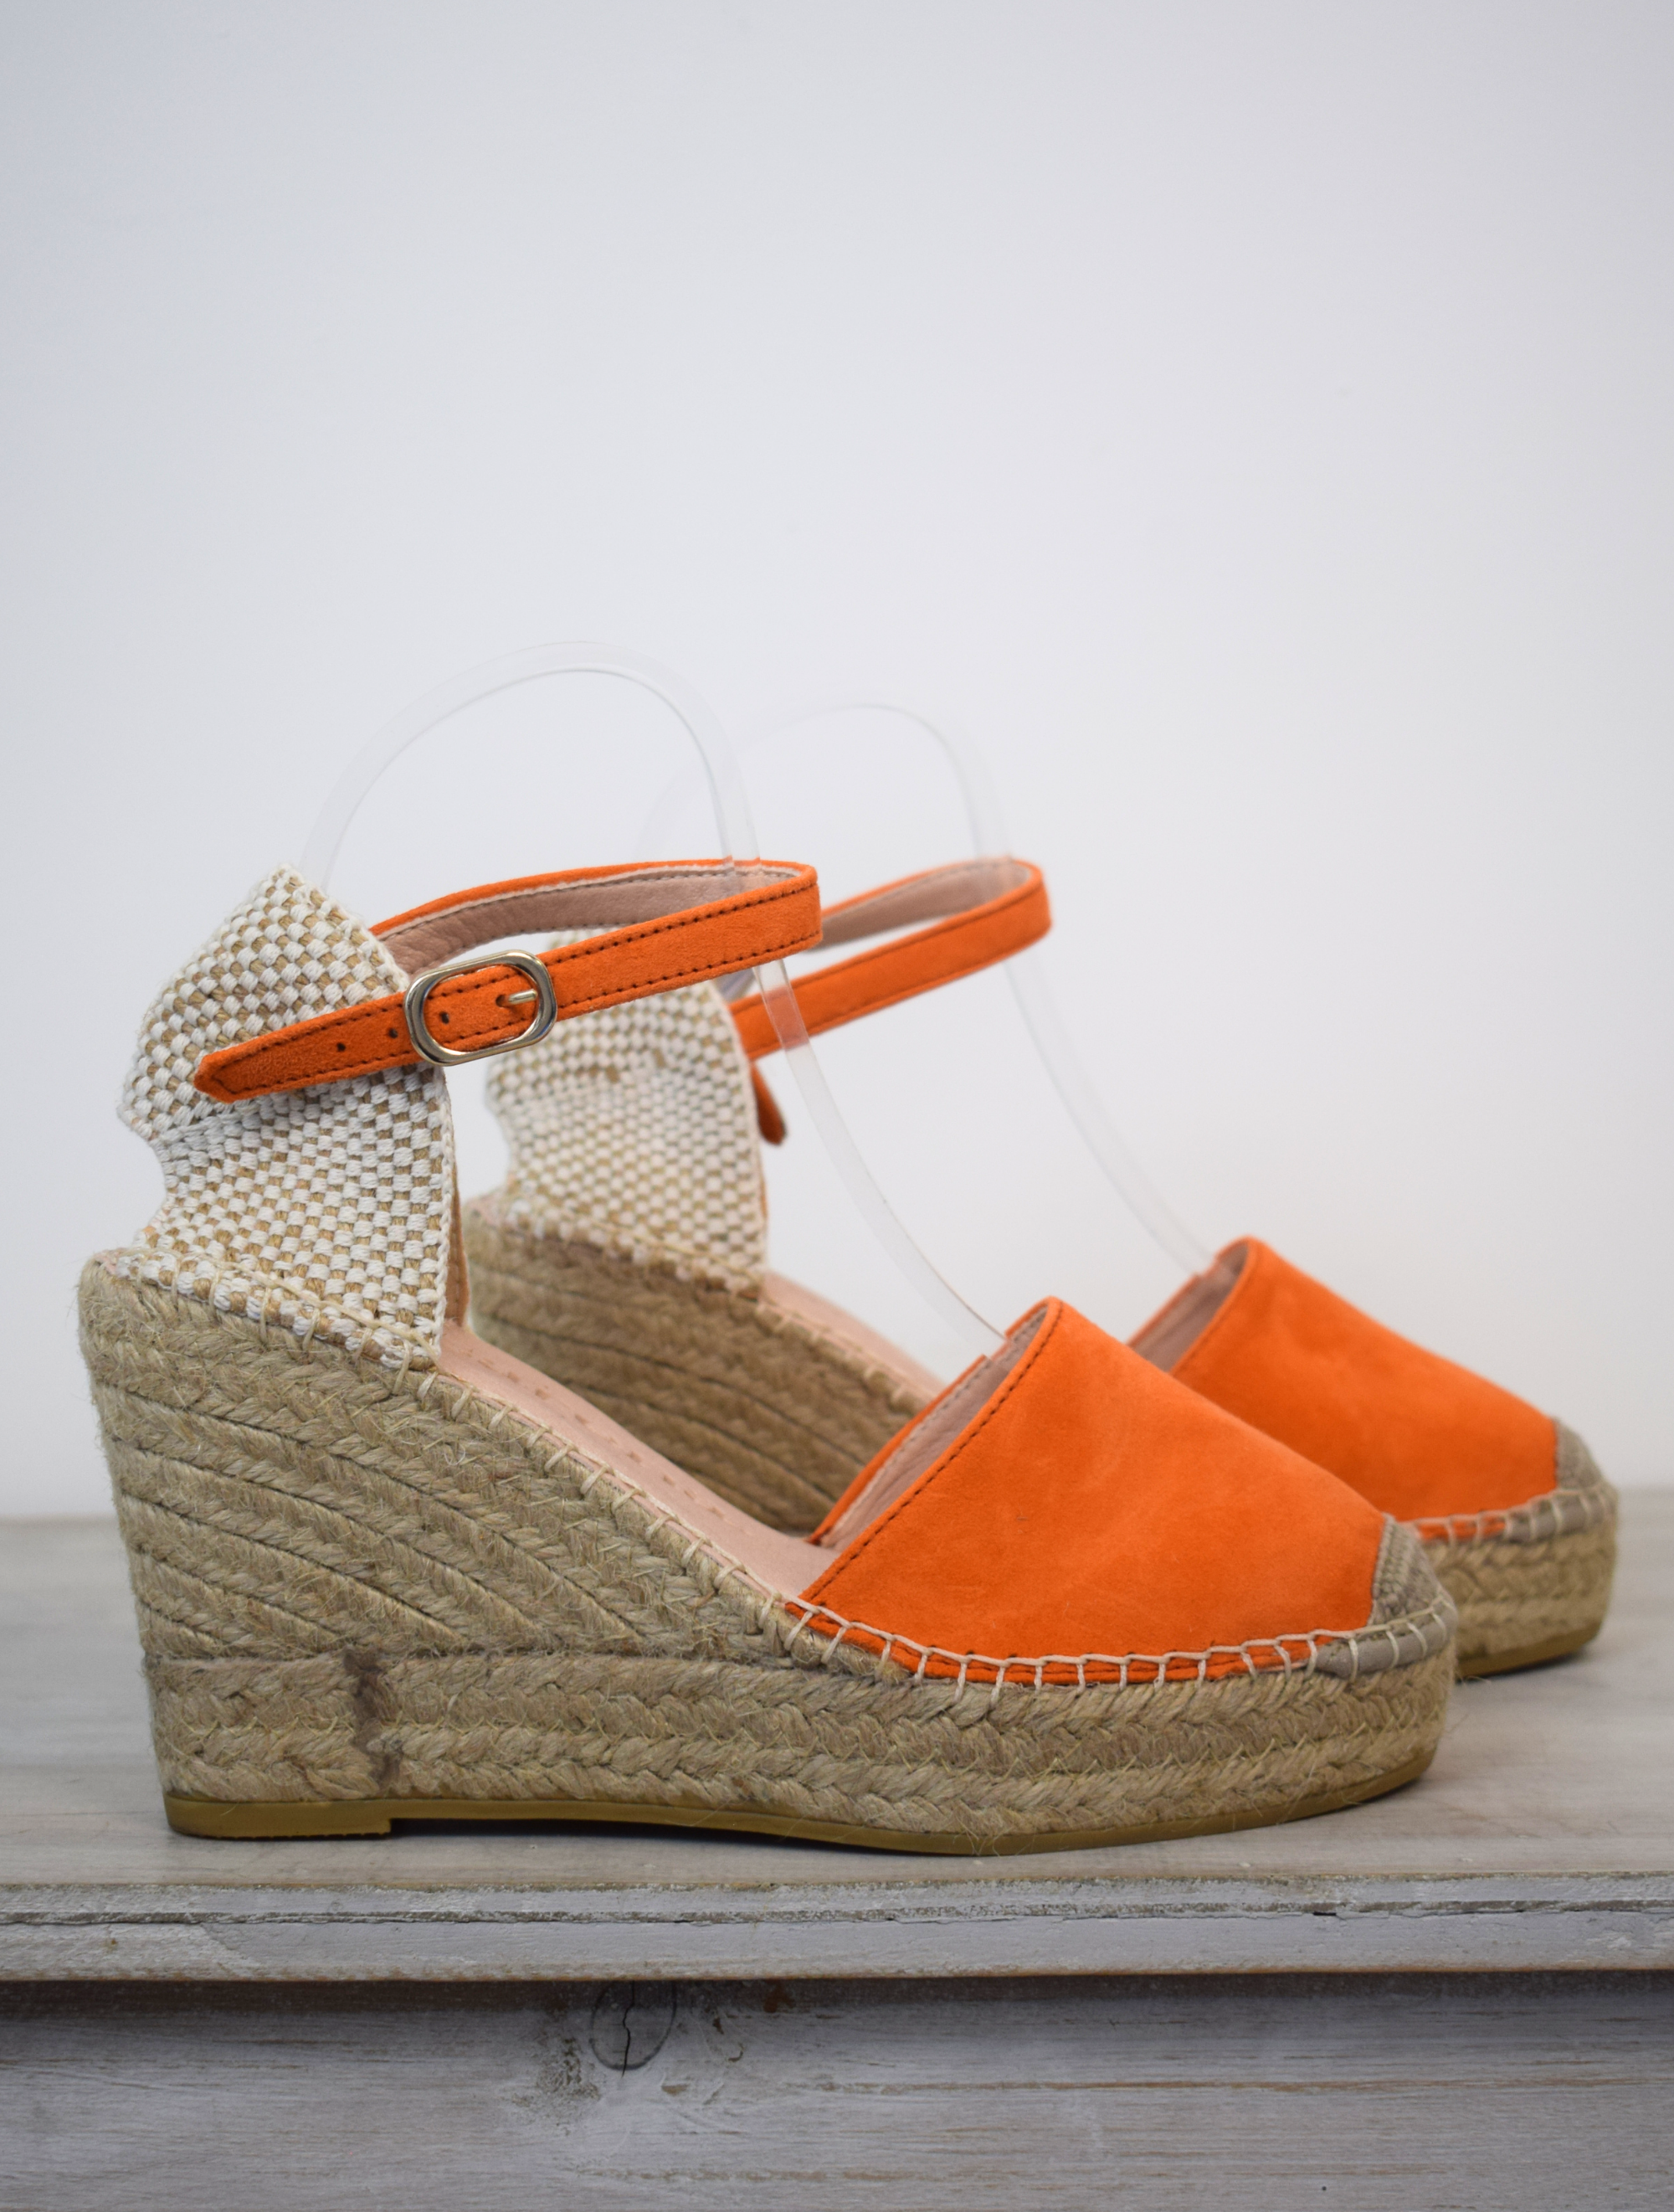 Orange suede espadrille with high heel and suede ankle strap